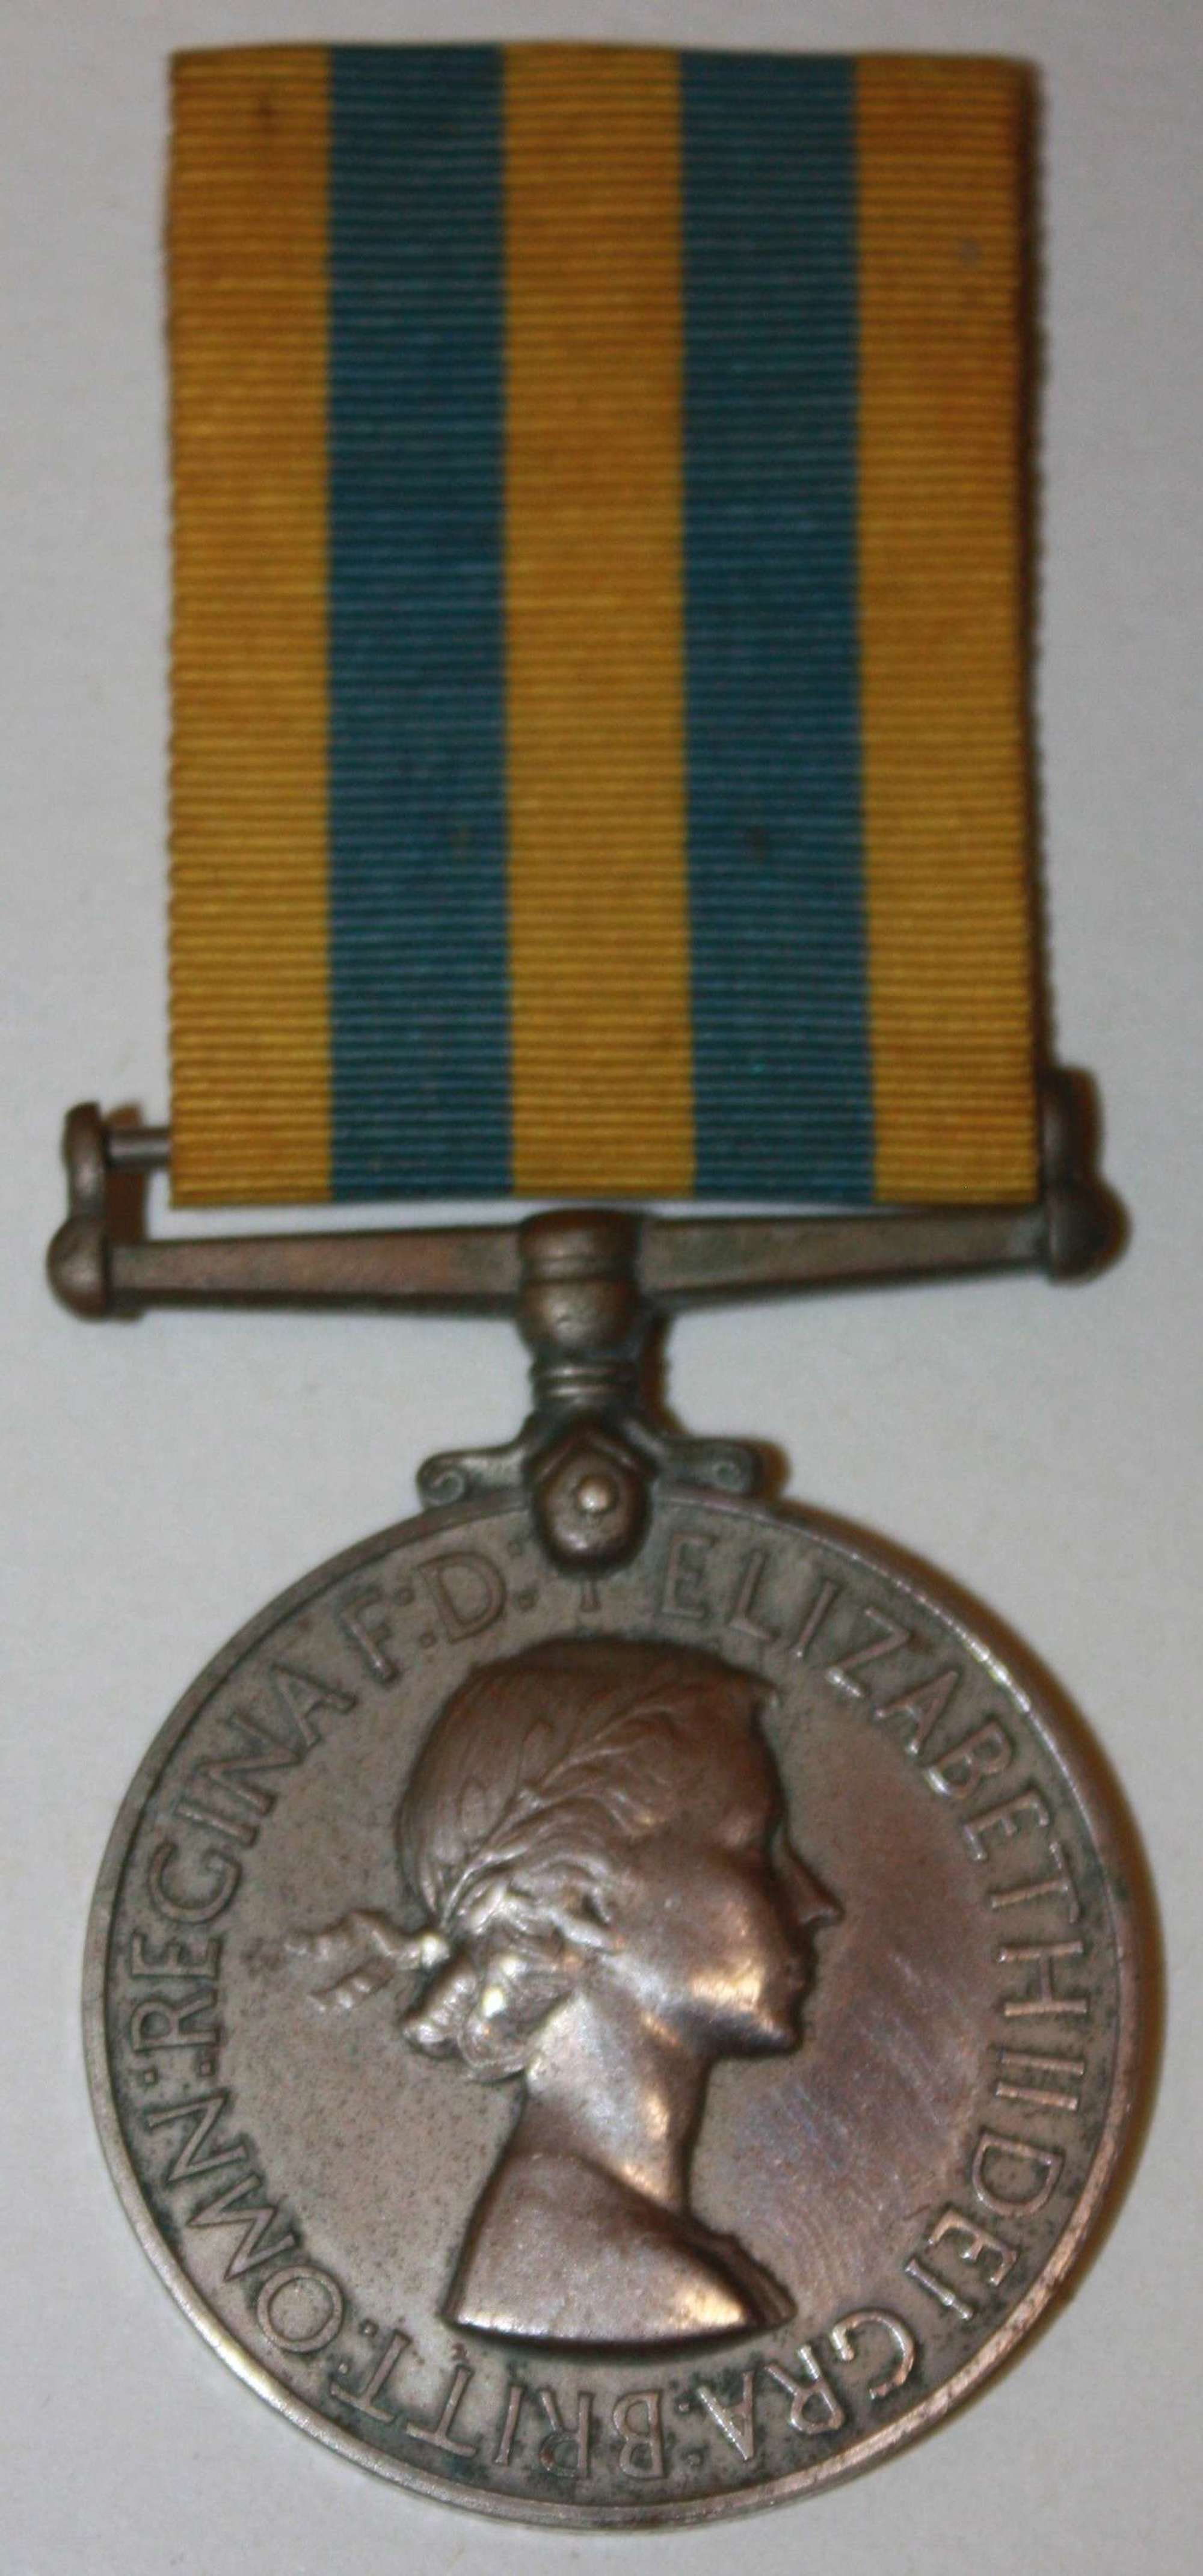 A SINGLE BRITISH KOREA MEDAL TO C/SMX845372D W K GREENER S A ( S ) RN